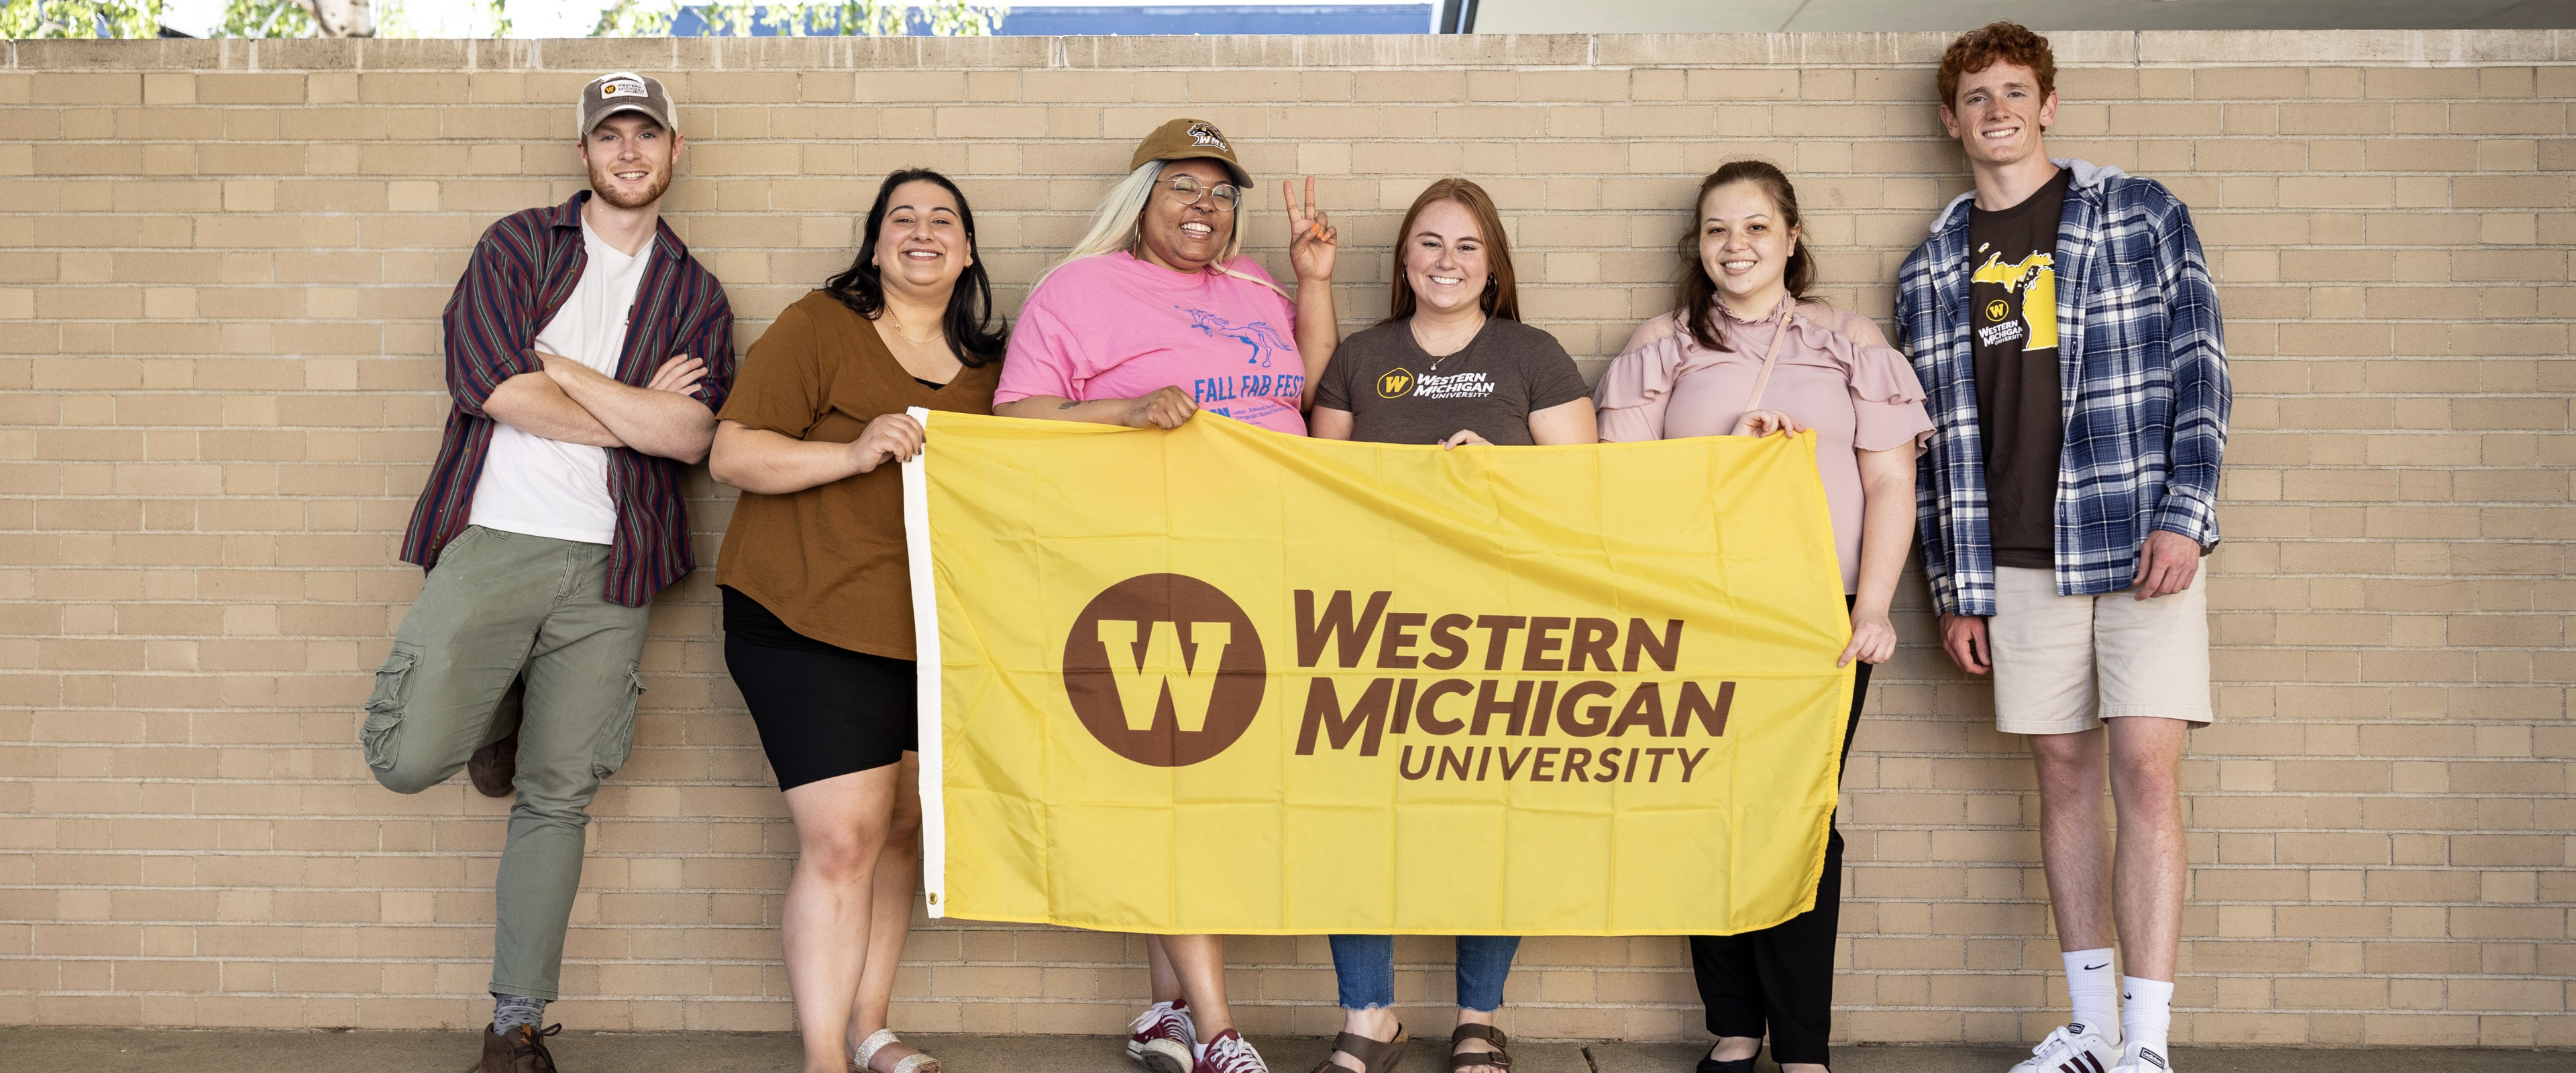 WMU students with flag